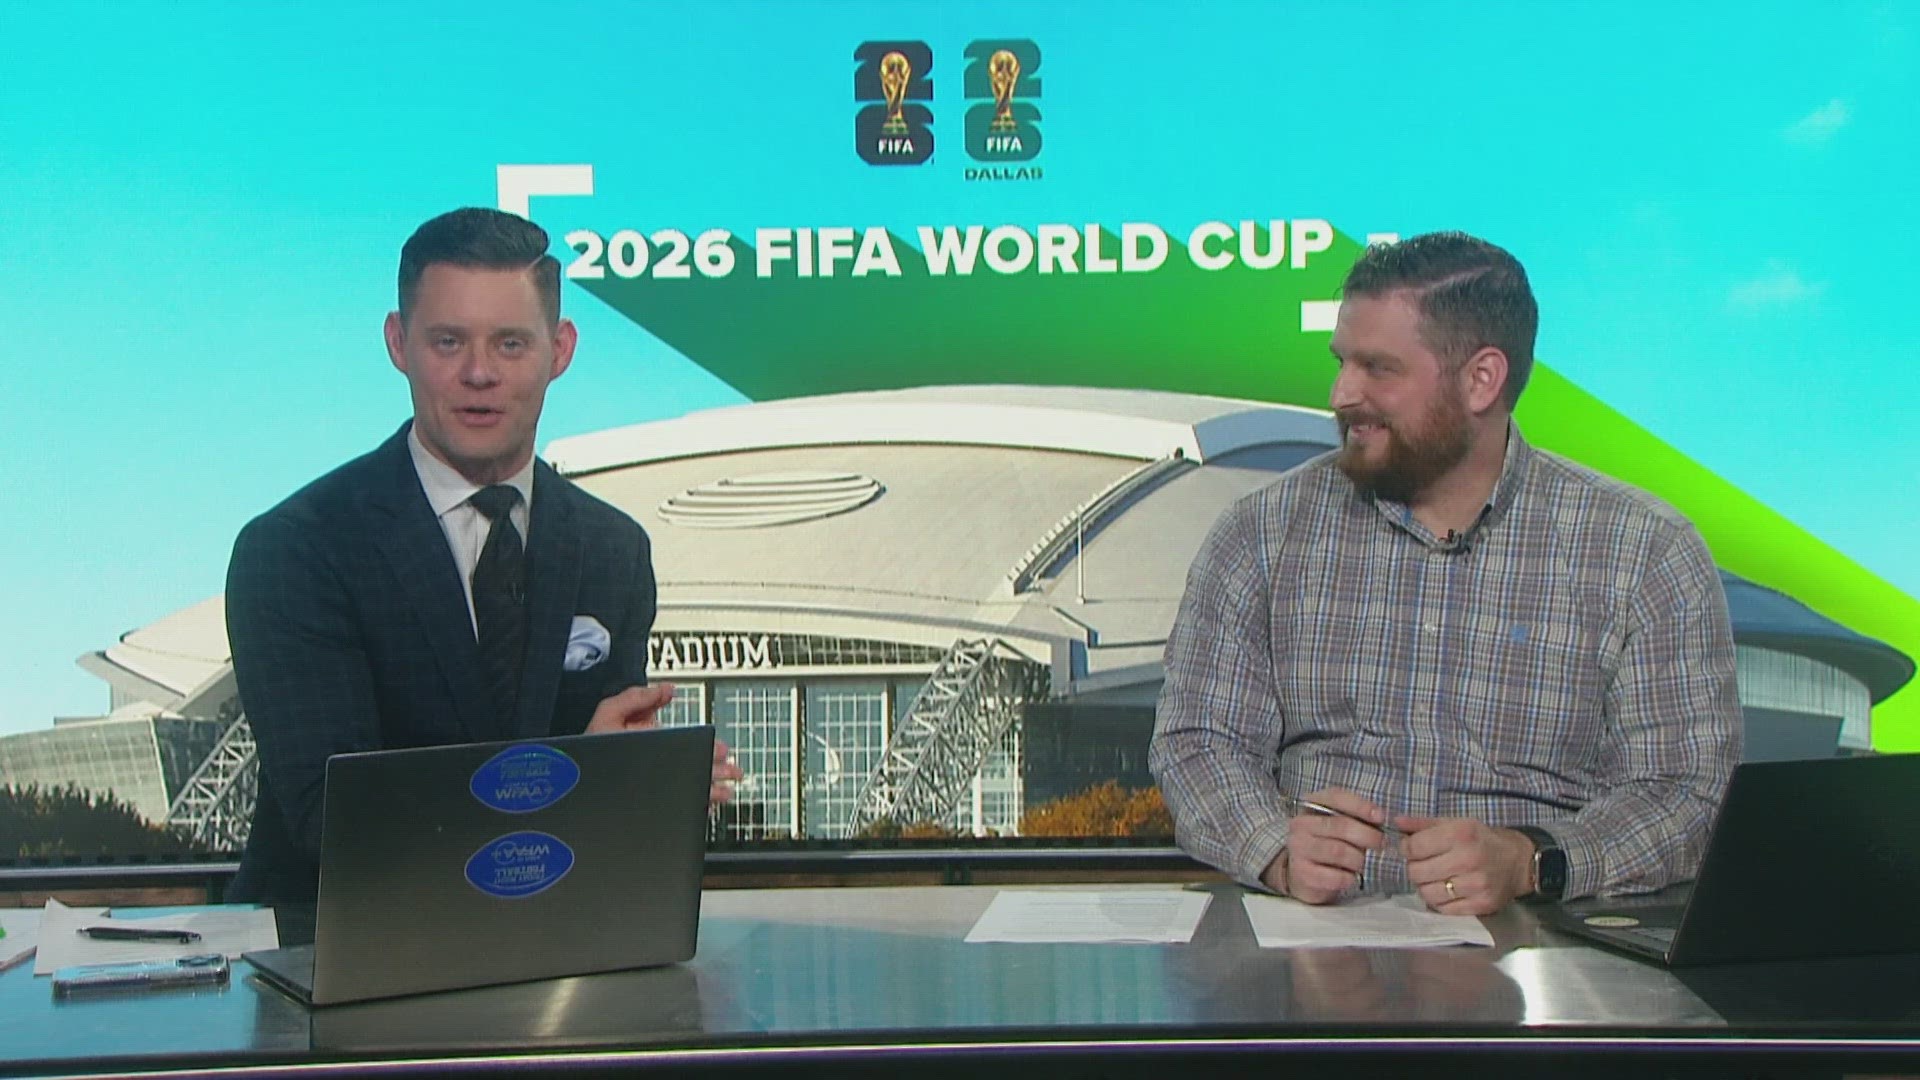 WFAA streamed live reaction and analysis to the 2026 FIFA World Cup match announcement on Feb. 4, 2024.